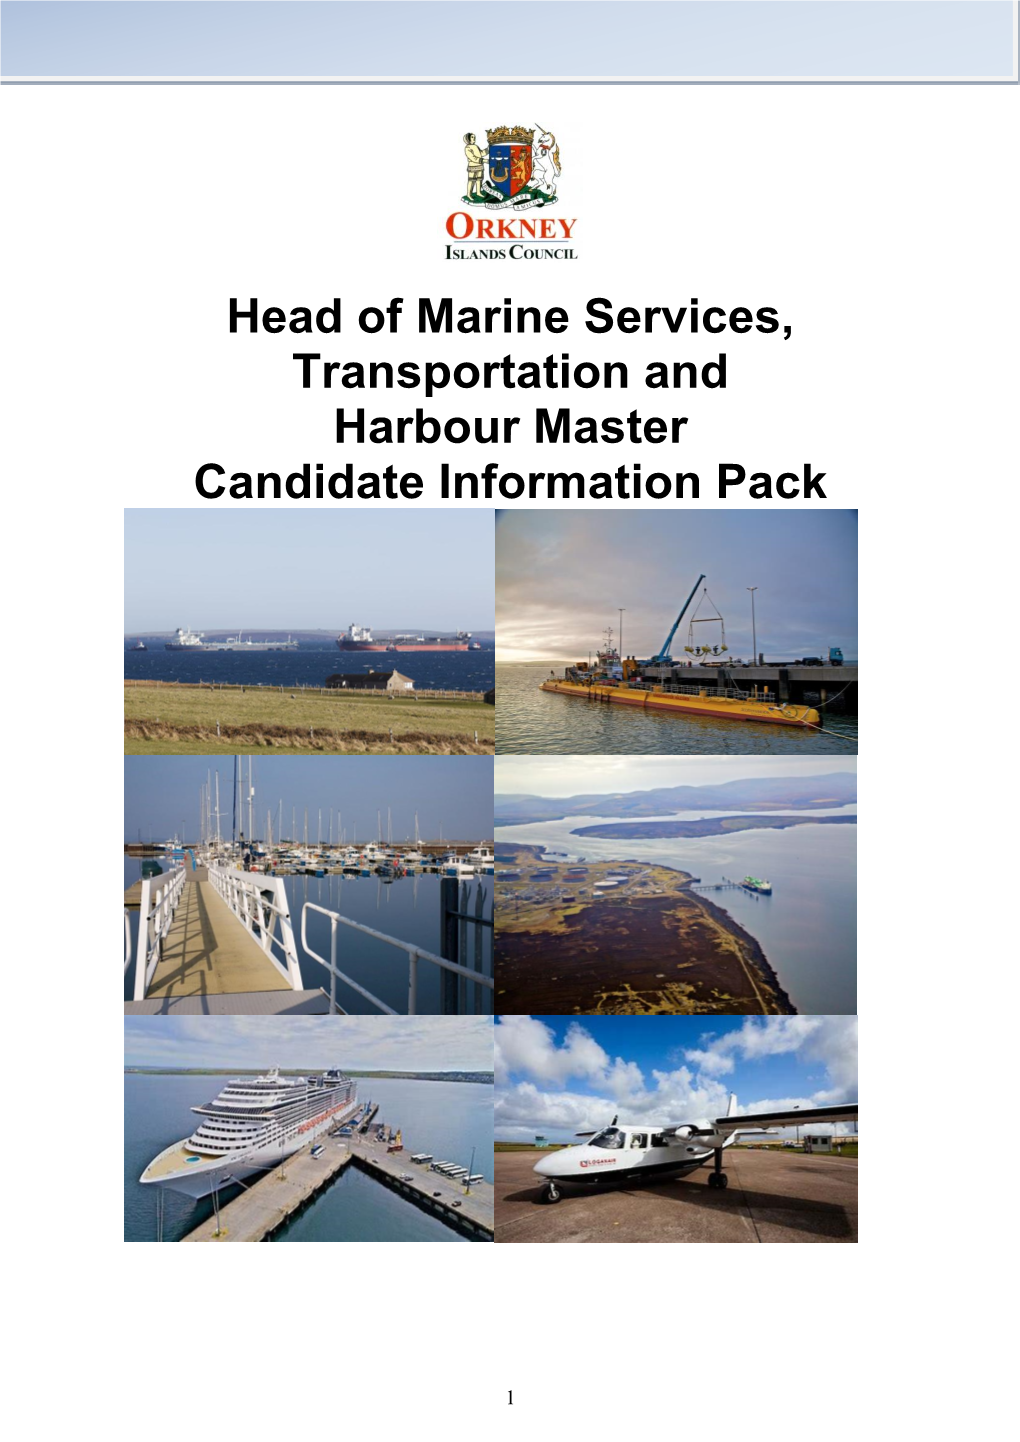 Head of Marine Services, Transportation and Harbour Master Candidate Information Pack